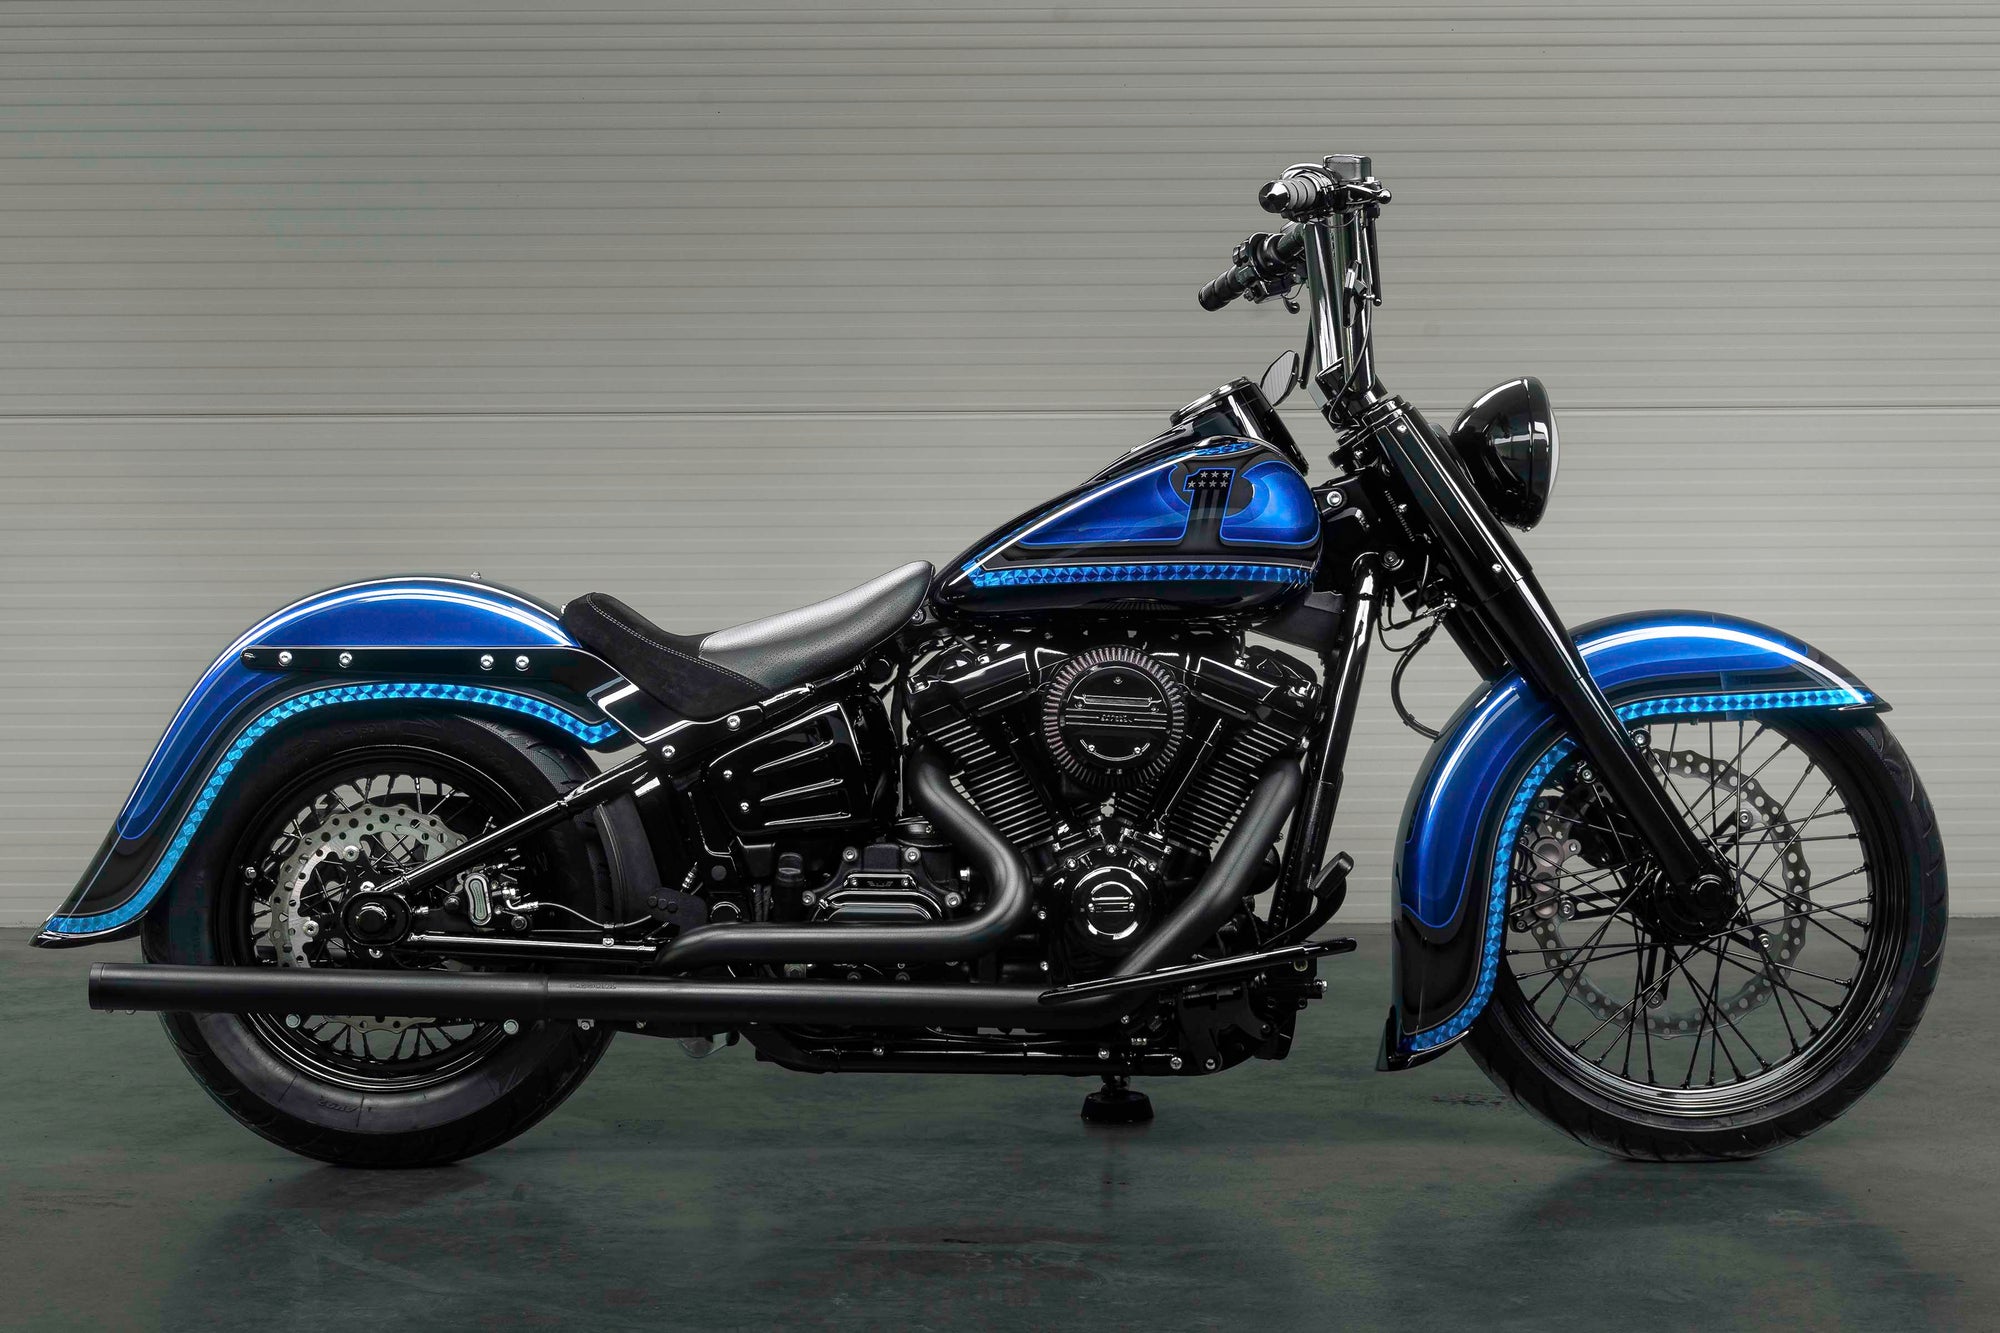 Modified Harley Davidson V-Rod motorcycle with Killer Custom parts from the side with a white wall in the background